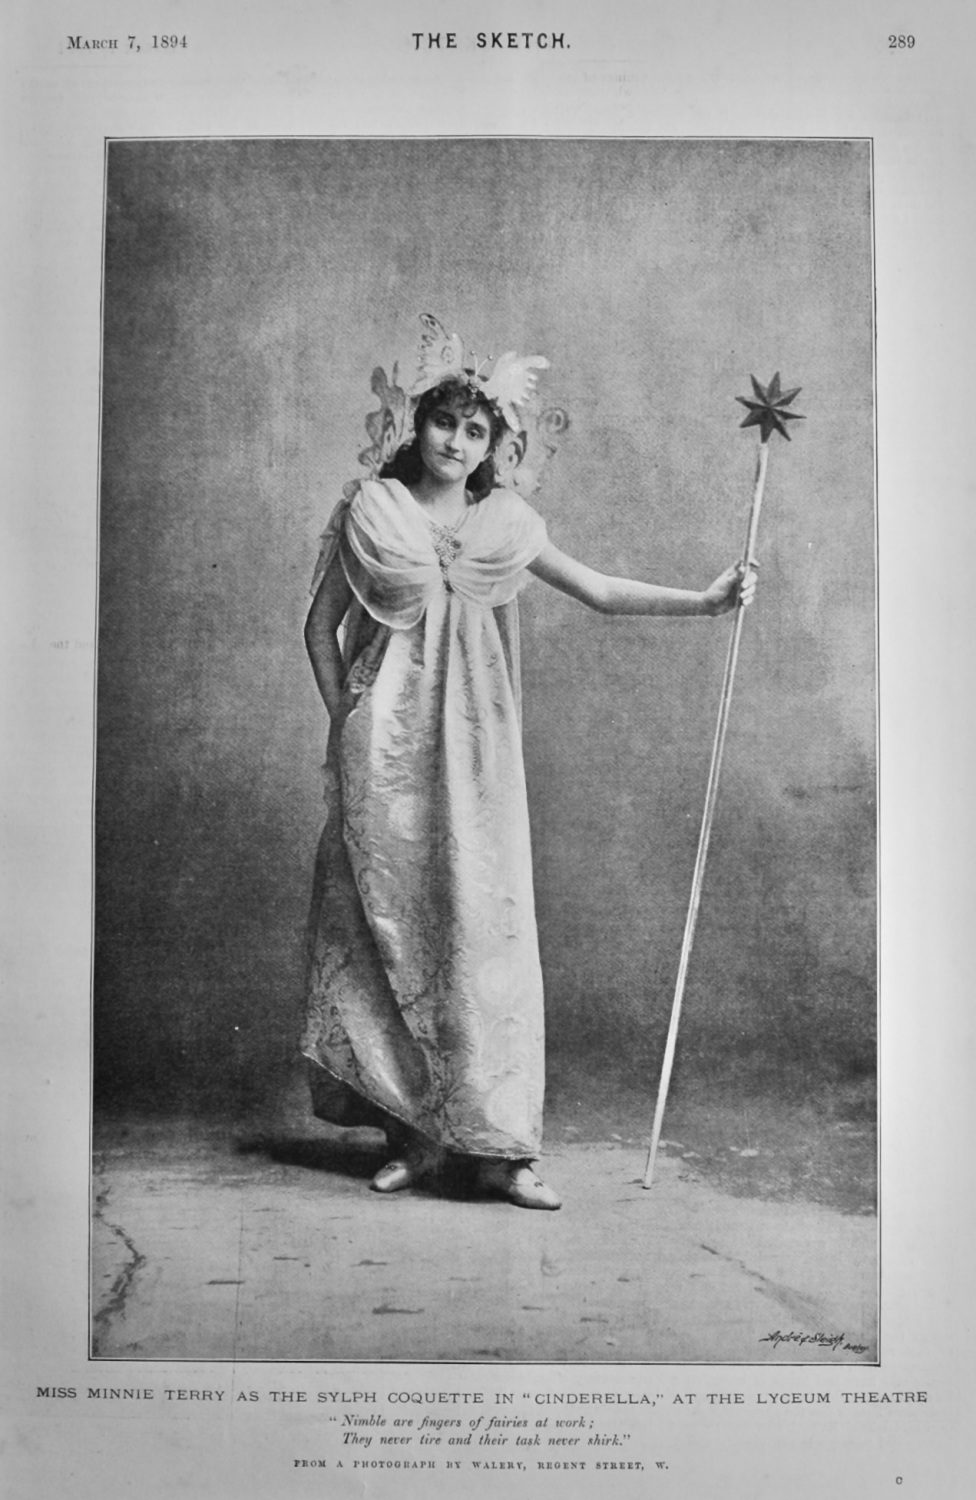 Miss Minnie Terry as the Sylph Coquette in 